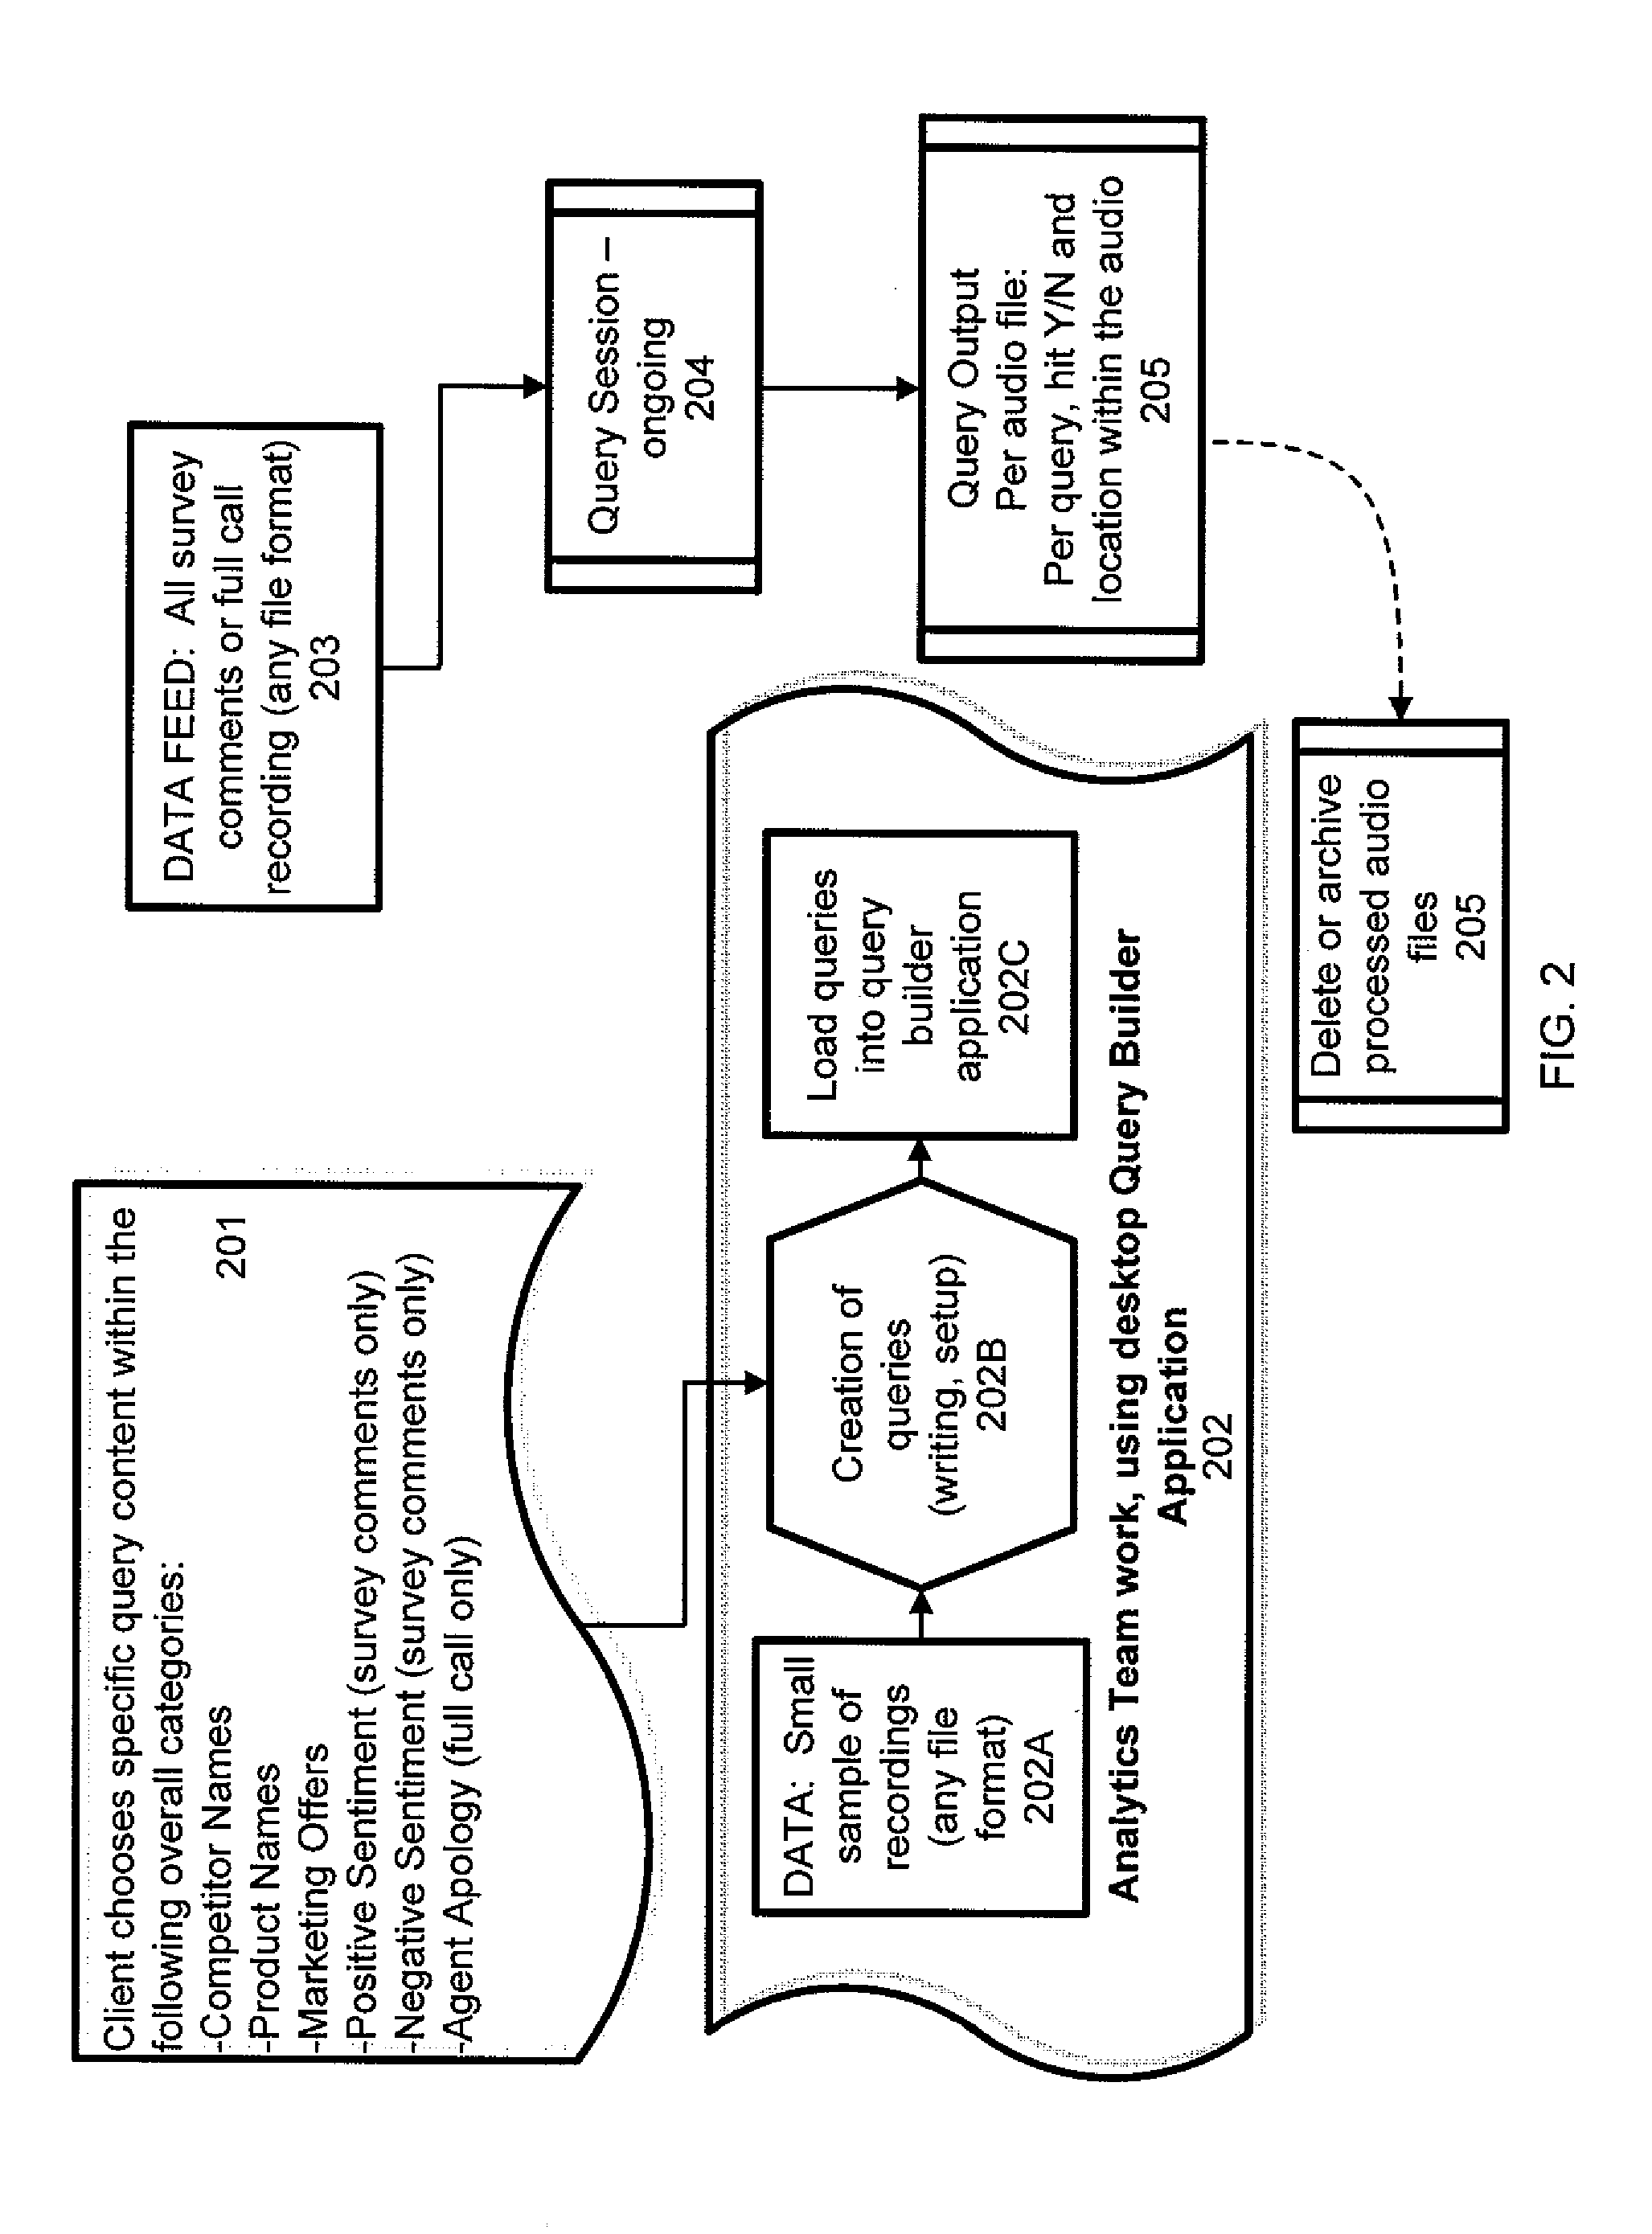 Method and apparatus of analyzing customer call data and related call information to determine call characteristics